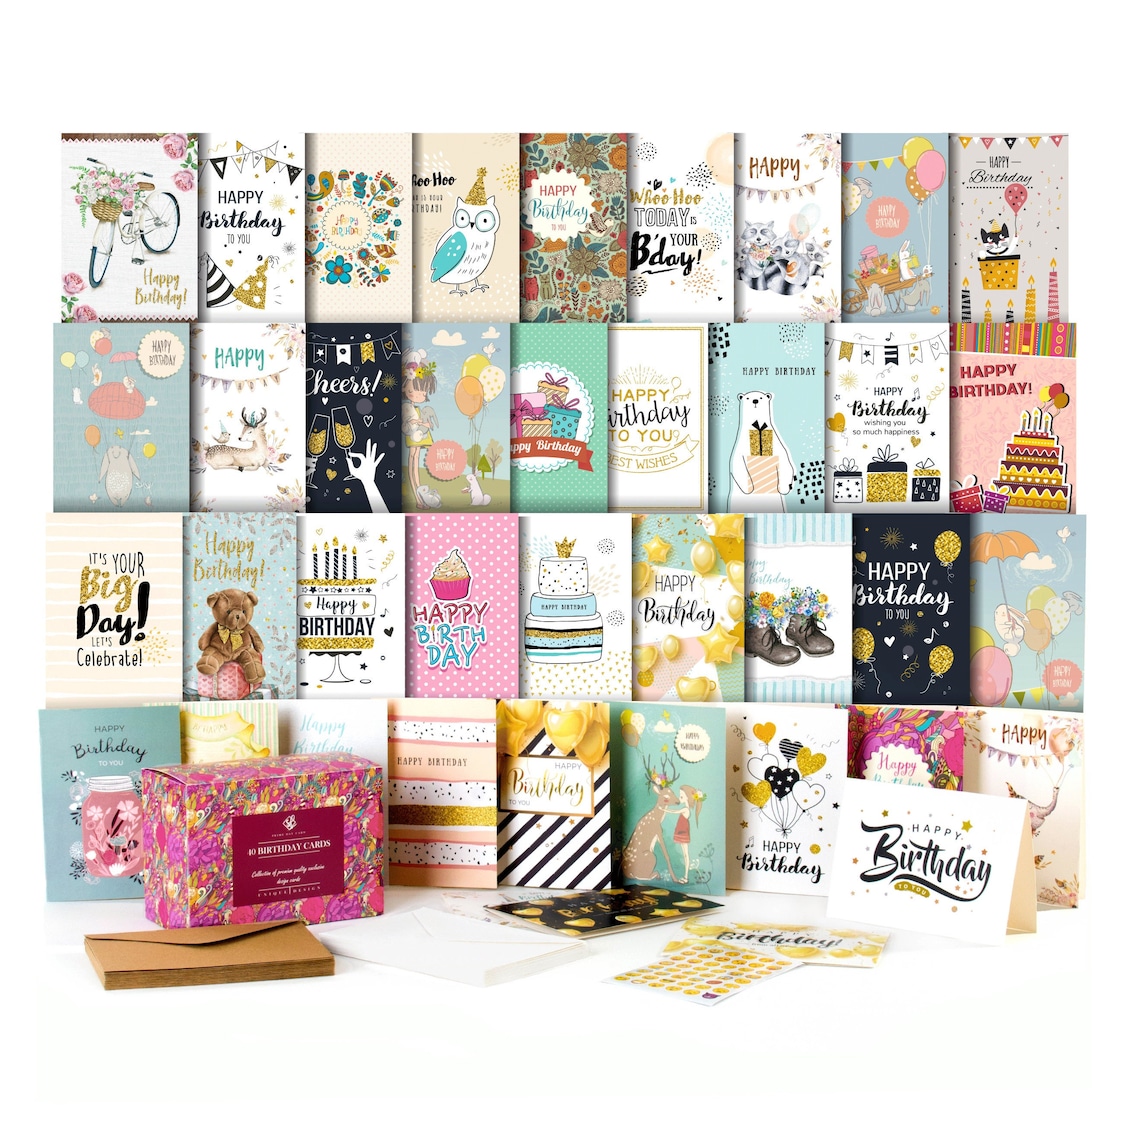 Happy Birthday Cards Assortment Cards in Bulk 40 Pack - Etsy